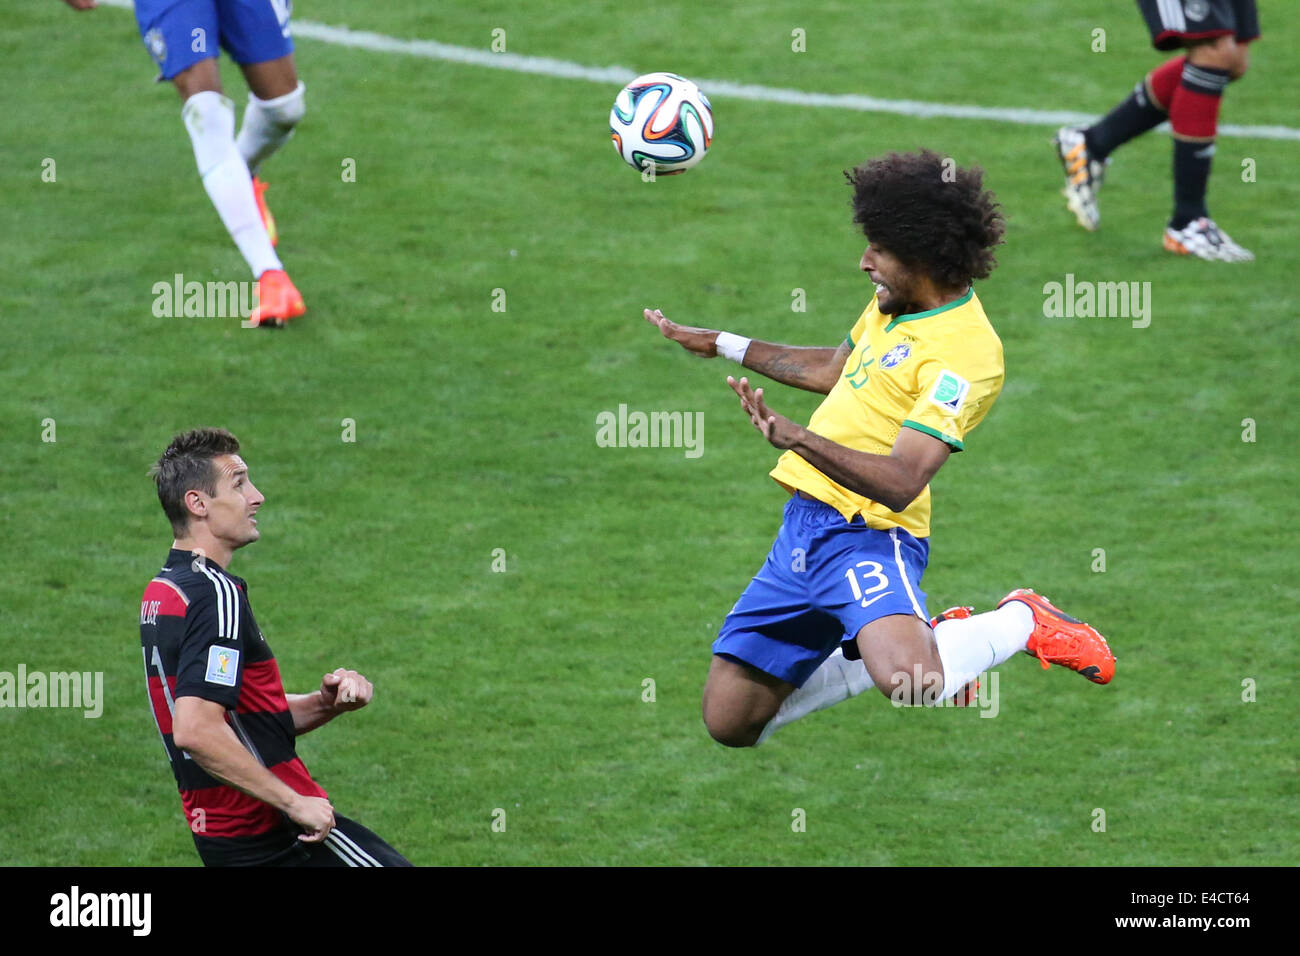 Belo Horizonte, Brazil. 8th July, 2014. Brazil's Dante vies with Germany's Miroslav Klose during a semifinal match between Brazil and Germany of 2014 FIFA World Cup at the Estadio Mineirao Stadium in Belo Horizonte, Brazil, on July 8, 2014. Credit:  Li Ming/Xinhua/Alamy Live News Stock Photo